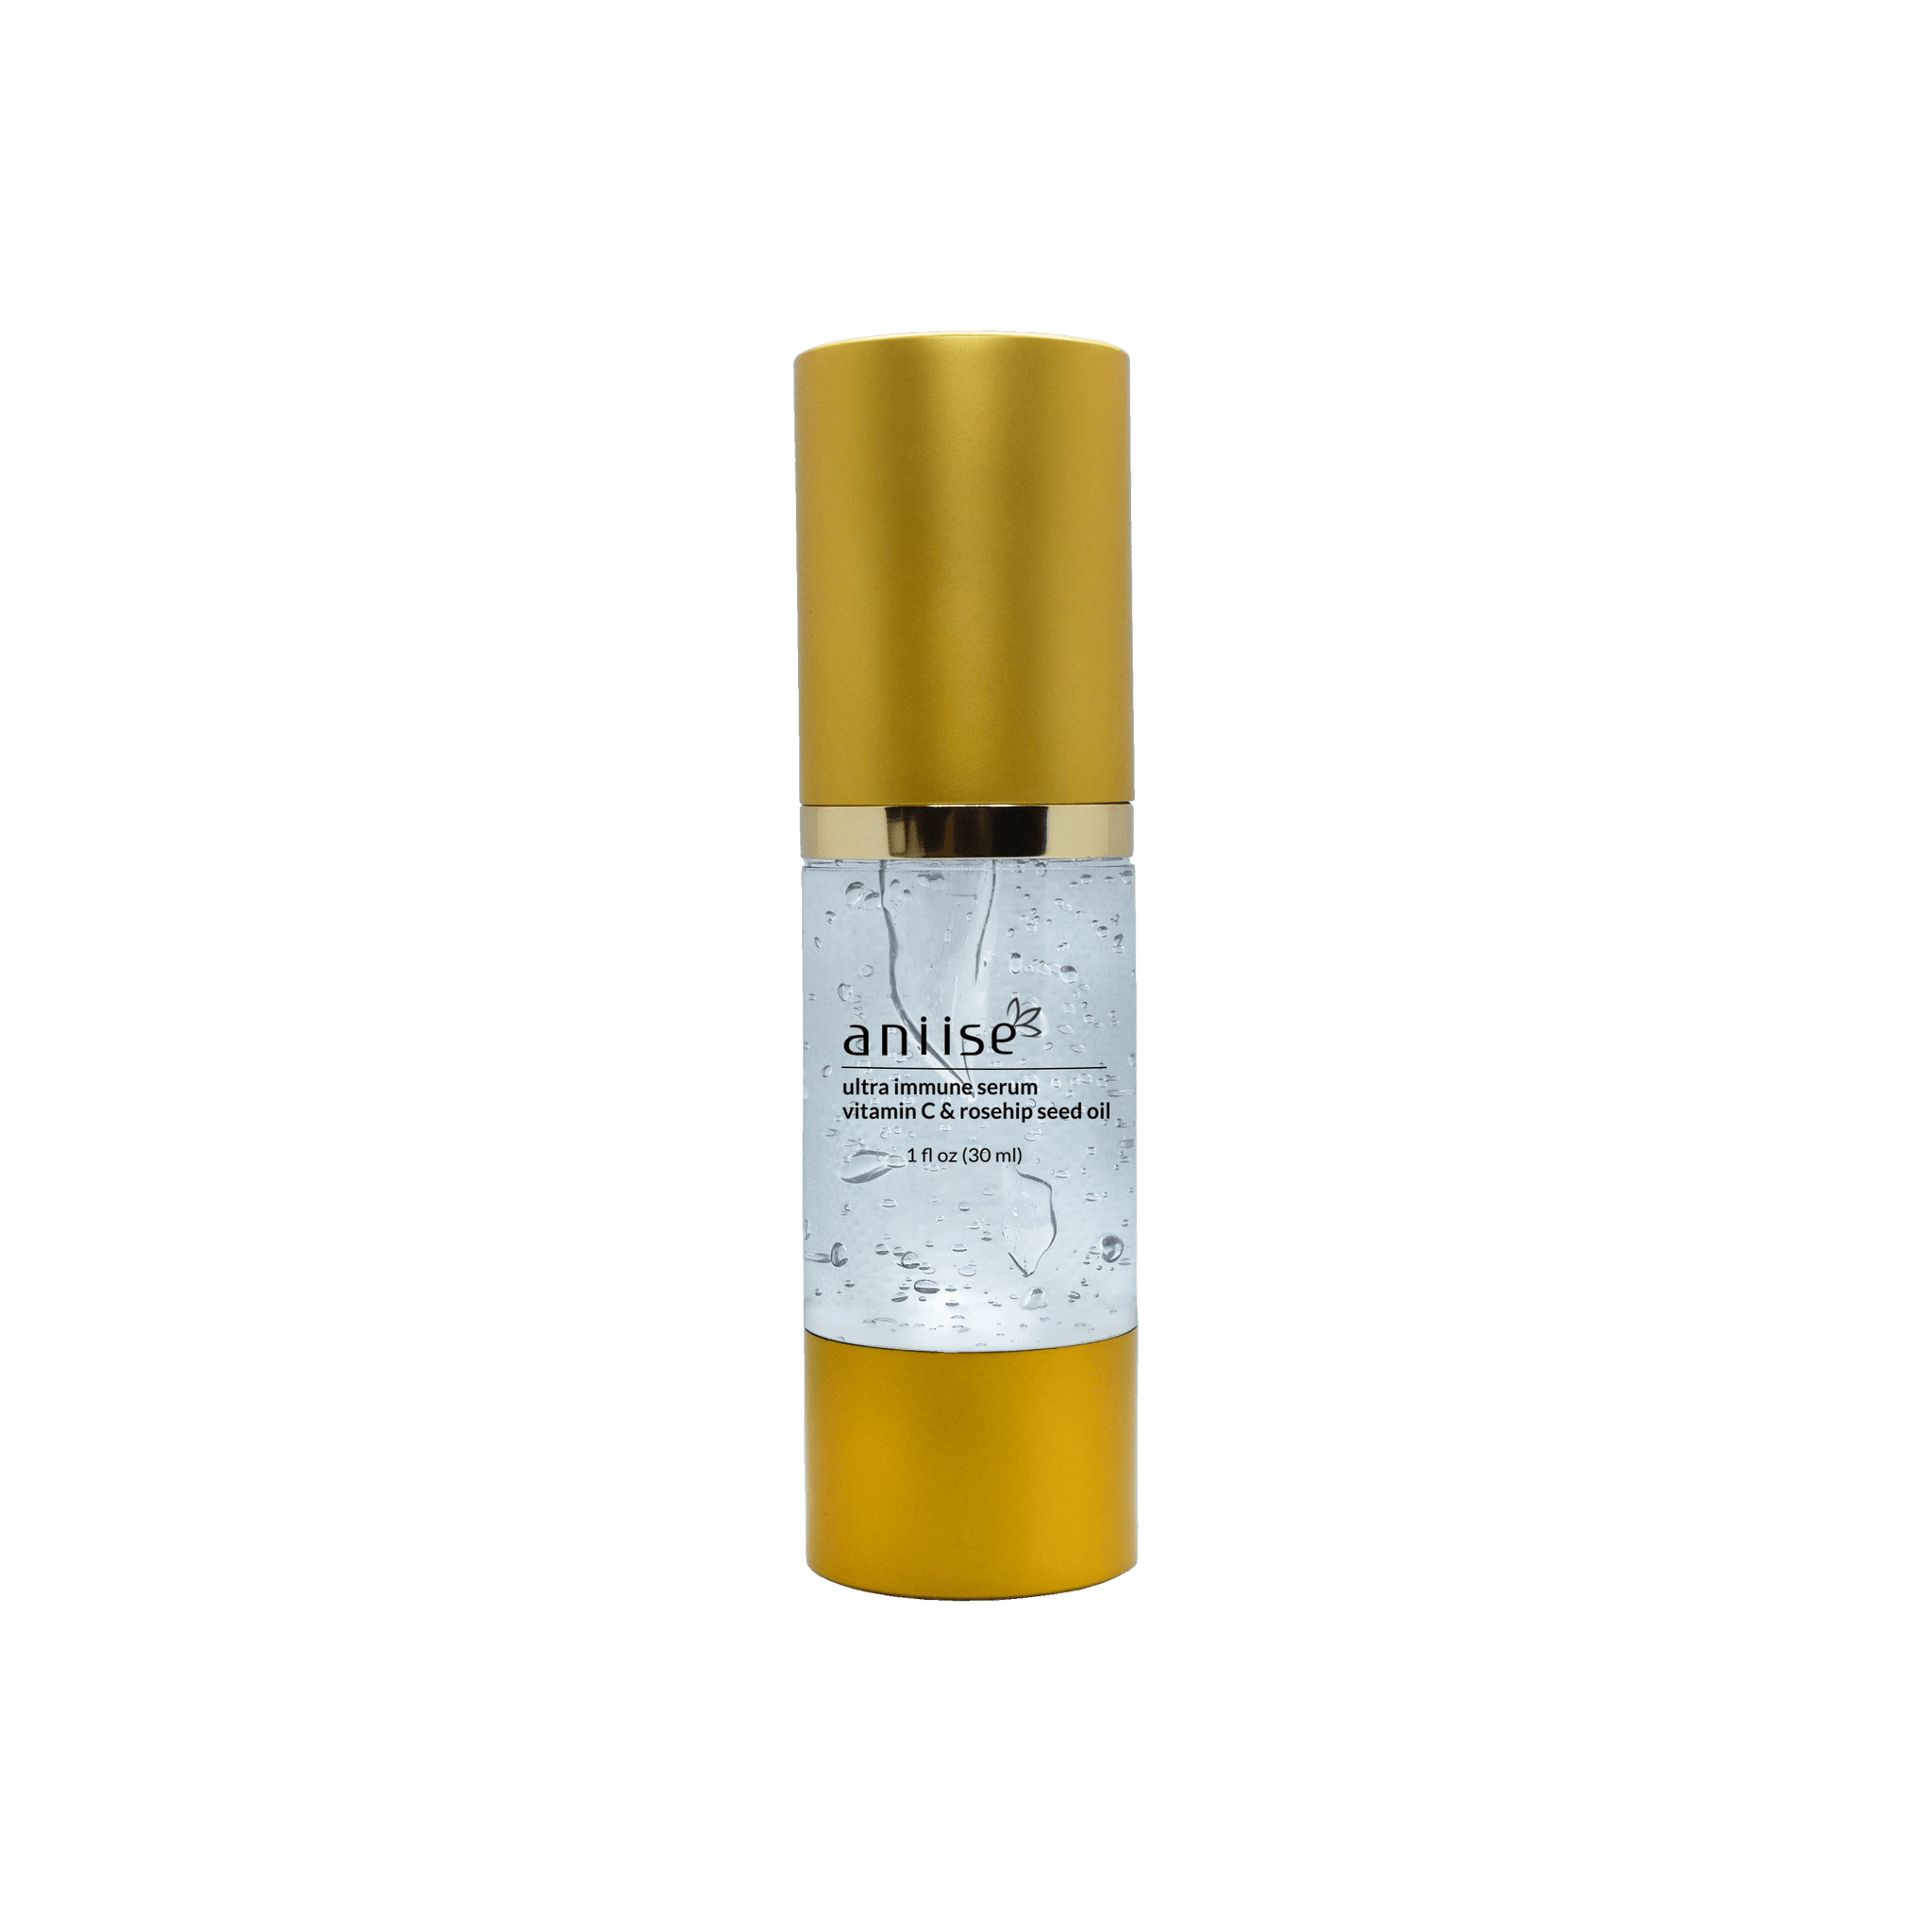 Ultra Immune Serum for Face & Neck Brightening & Anti-Aging by Aniise